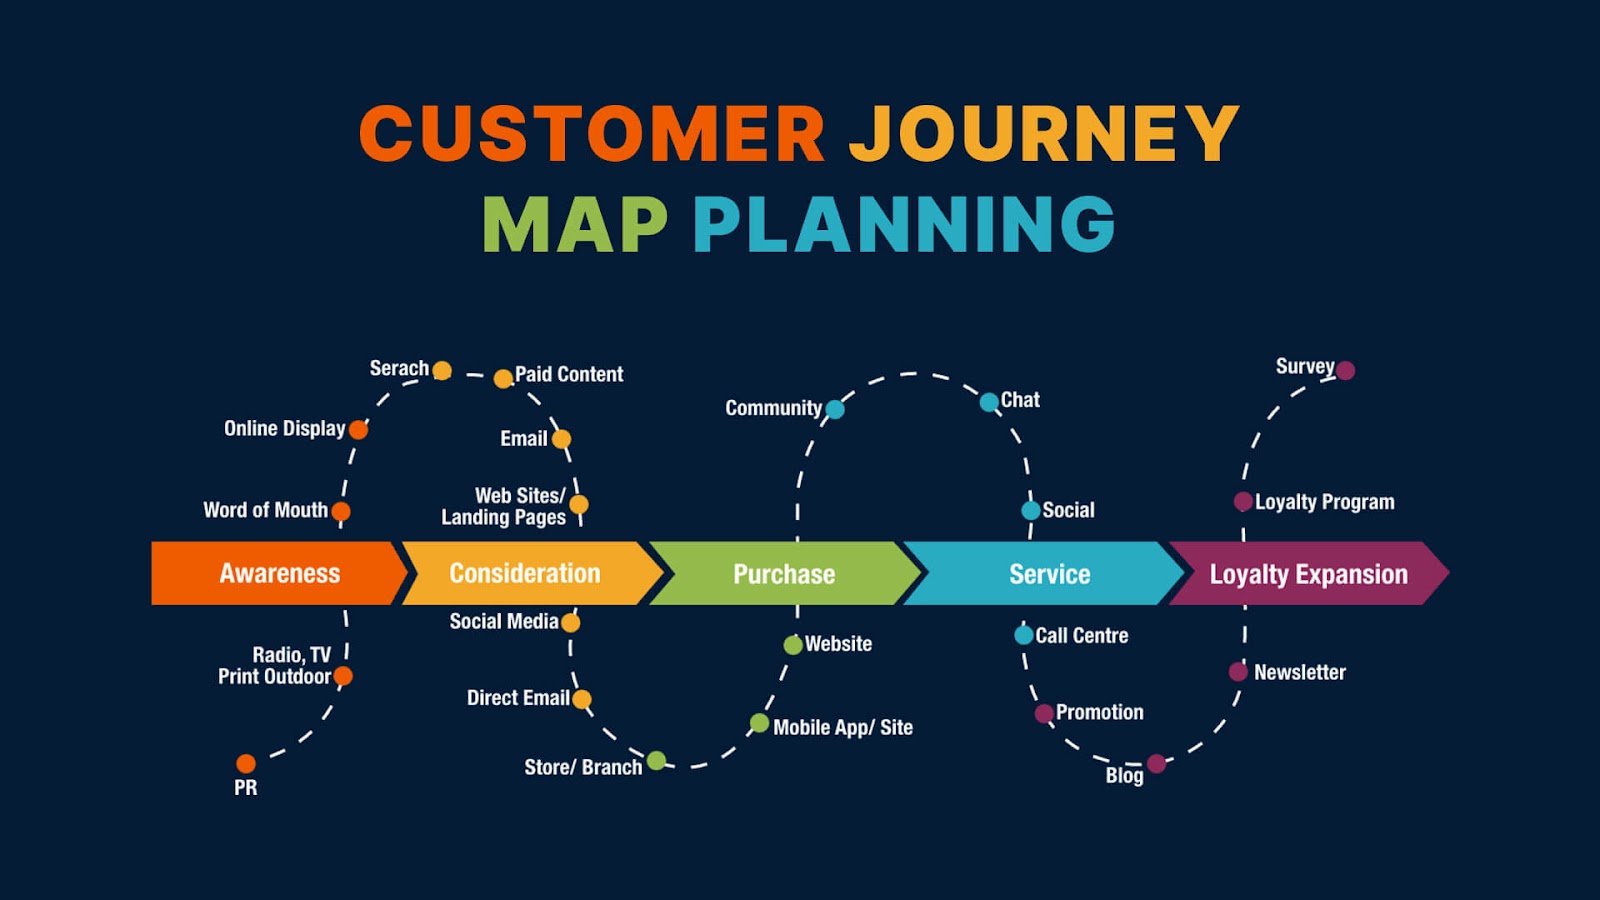 Customer journey map planning e-commerce practices